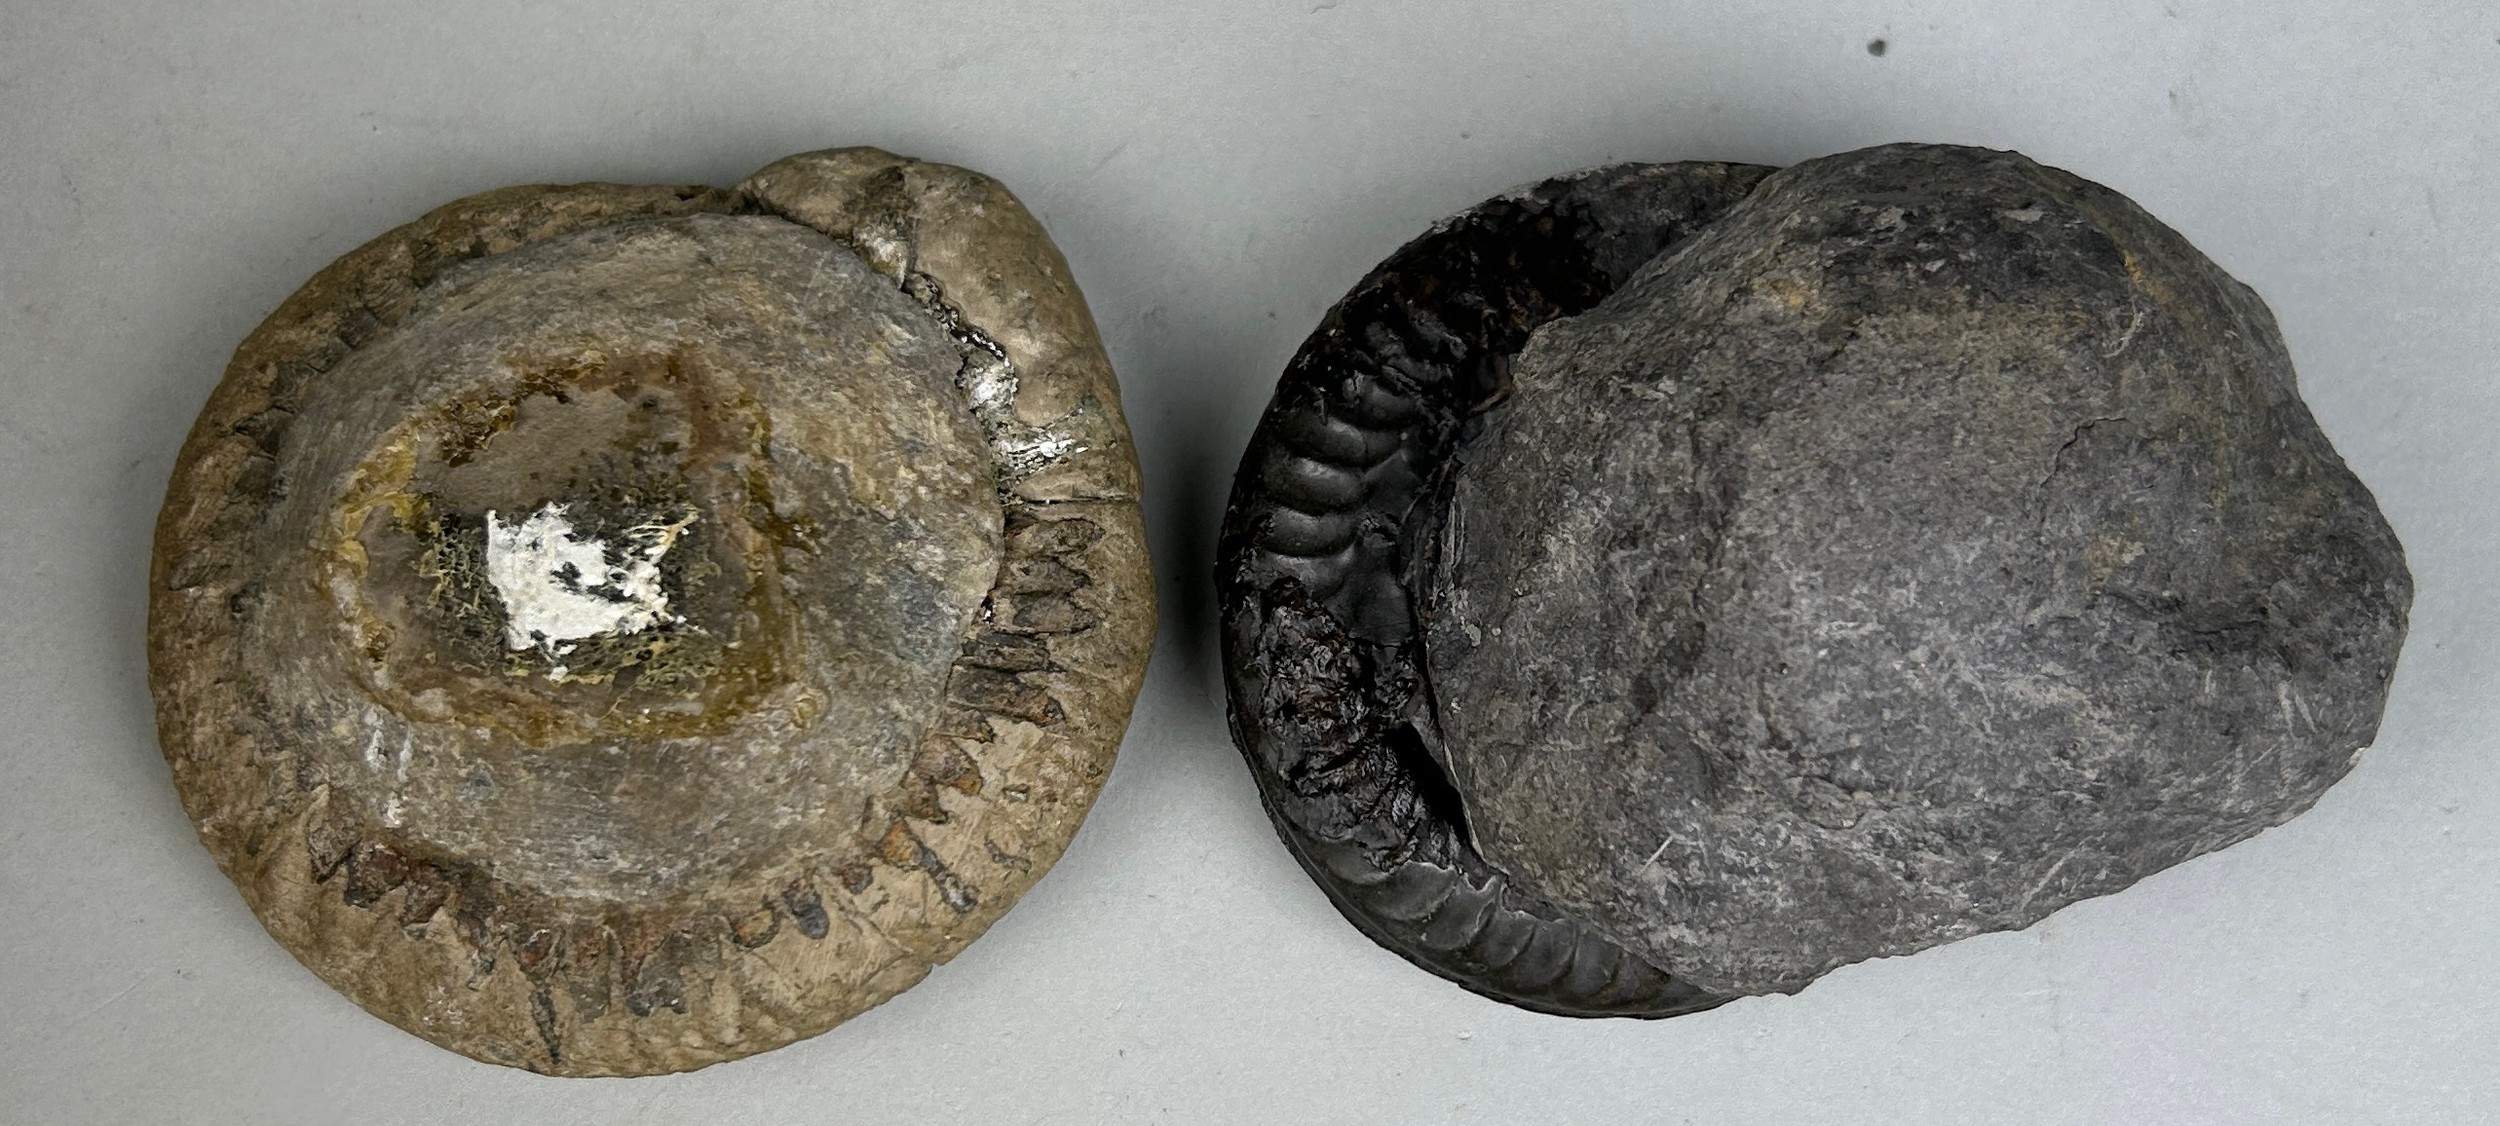 AMMONITE FOSSILS FROM WHITBY, YORKSHIRE A pair of ammonite fossils from Whitby, Yorkshire. - Image 3 of 3